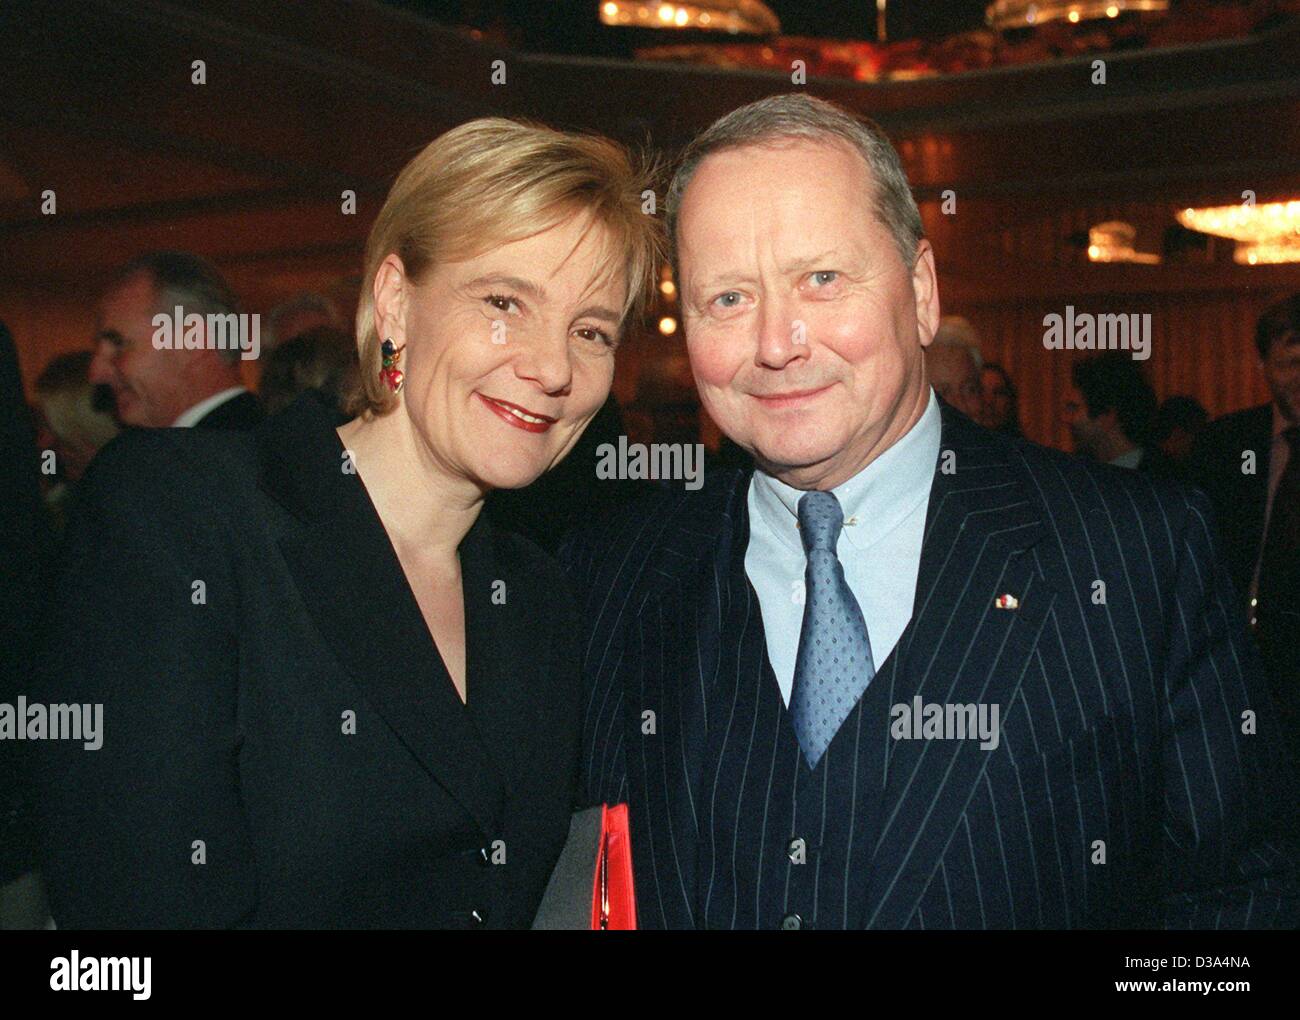 Dpa Wolfgang Porsche Grandson Of Ferdinand Porsche And Owner Of The Hotel Castle Prielau In Zell Am See Near Salzburg And His Wife Susanne Movie Producer At A Reception In Munich S